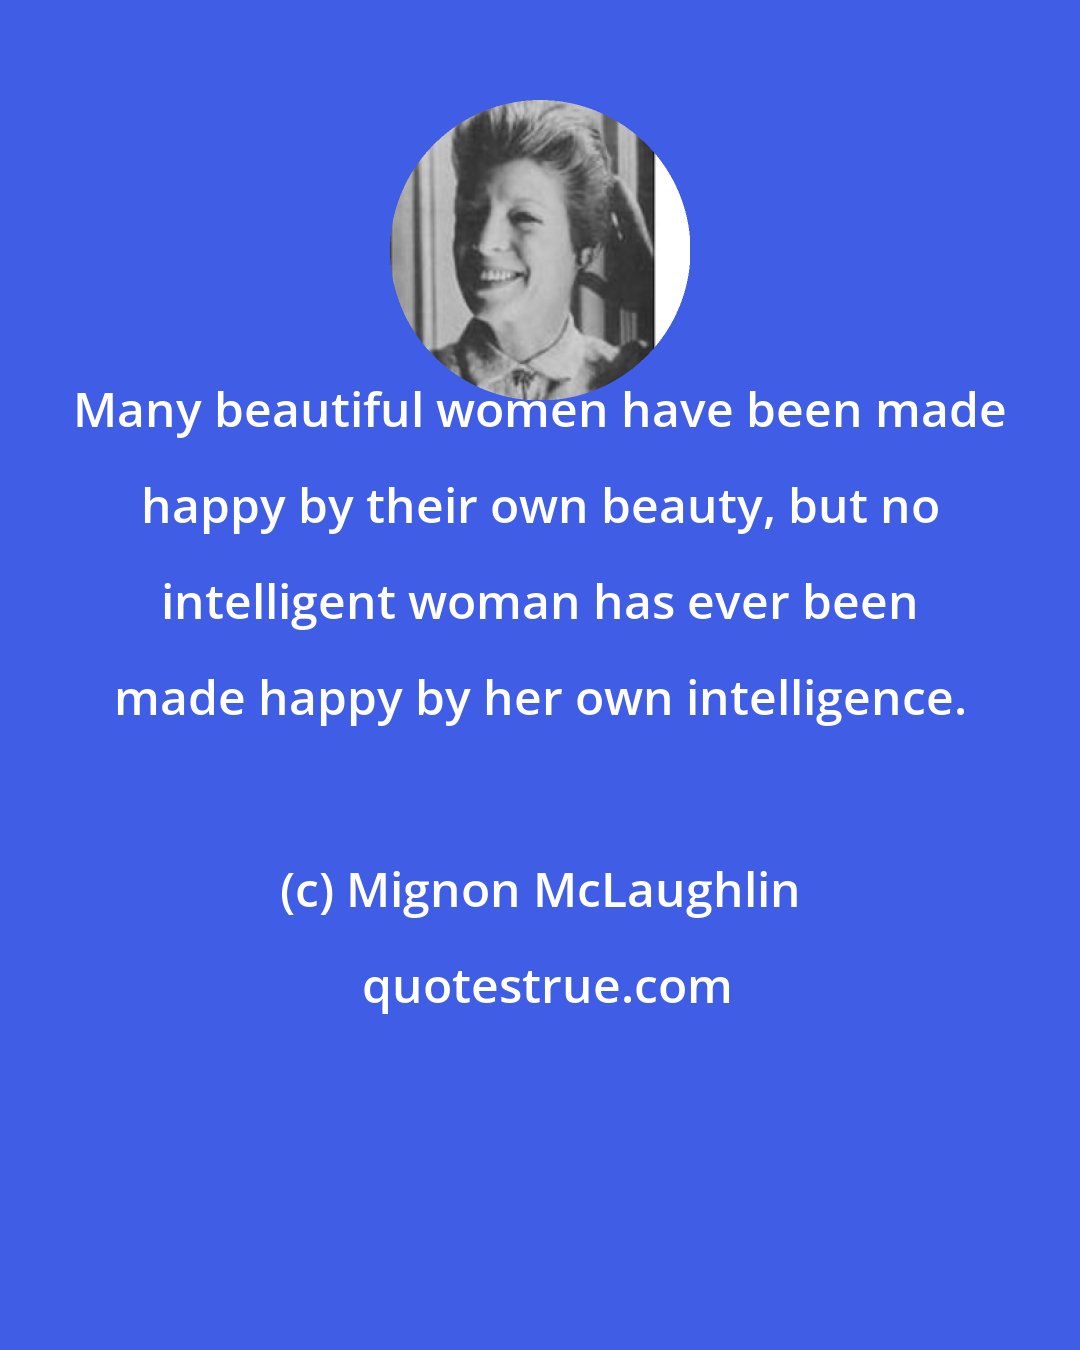 Mignon McLaughlin: Many beautiful women have been made happy by their own beauty, but no intelligent woman has ever been made happy by her own intelligence.